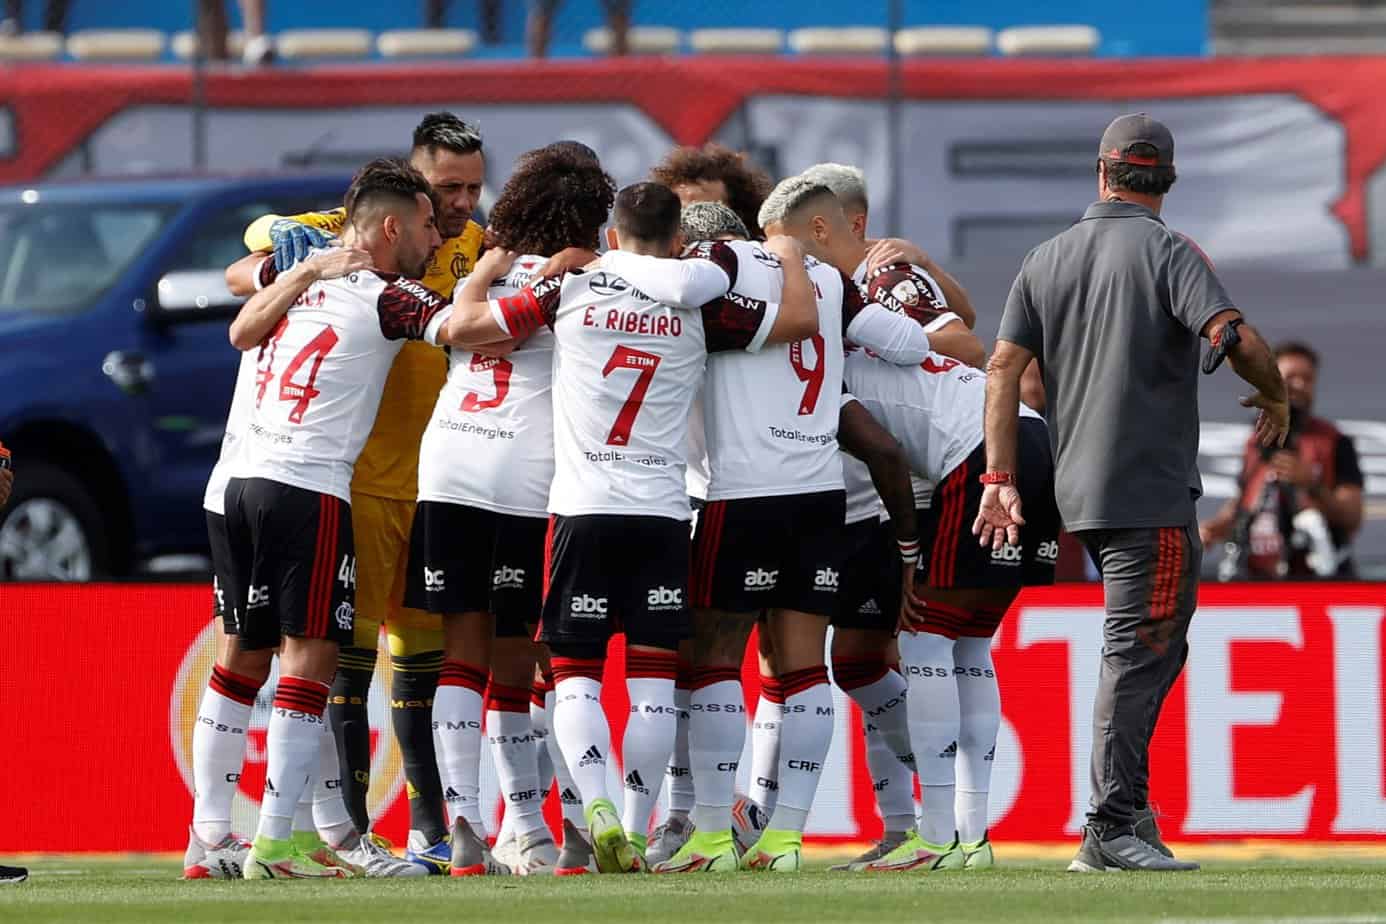 Flamengo vs. Ceará – Betting Odds and Free Picks